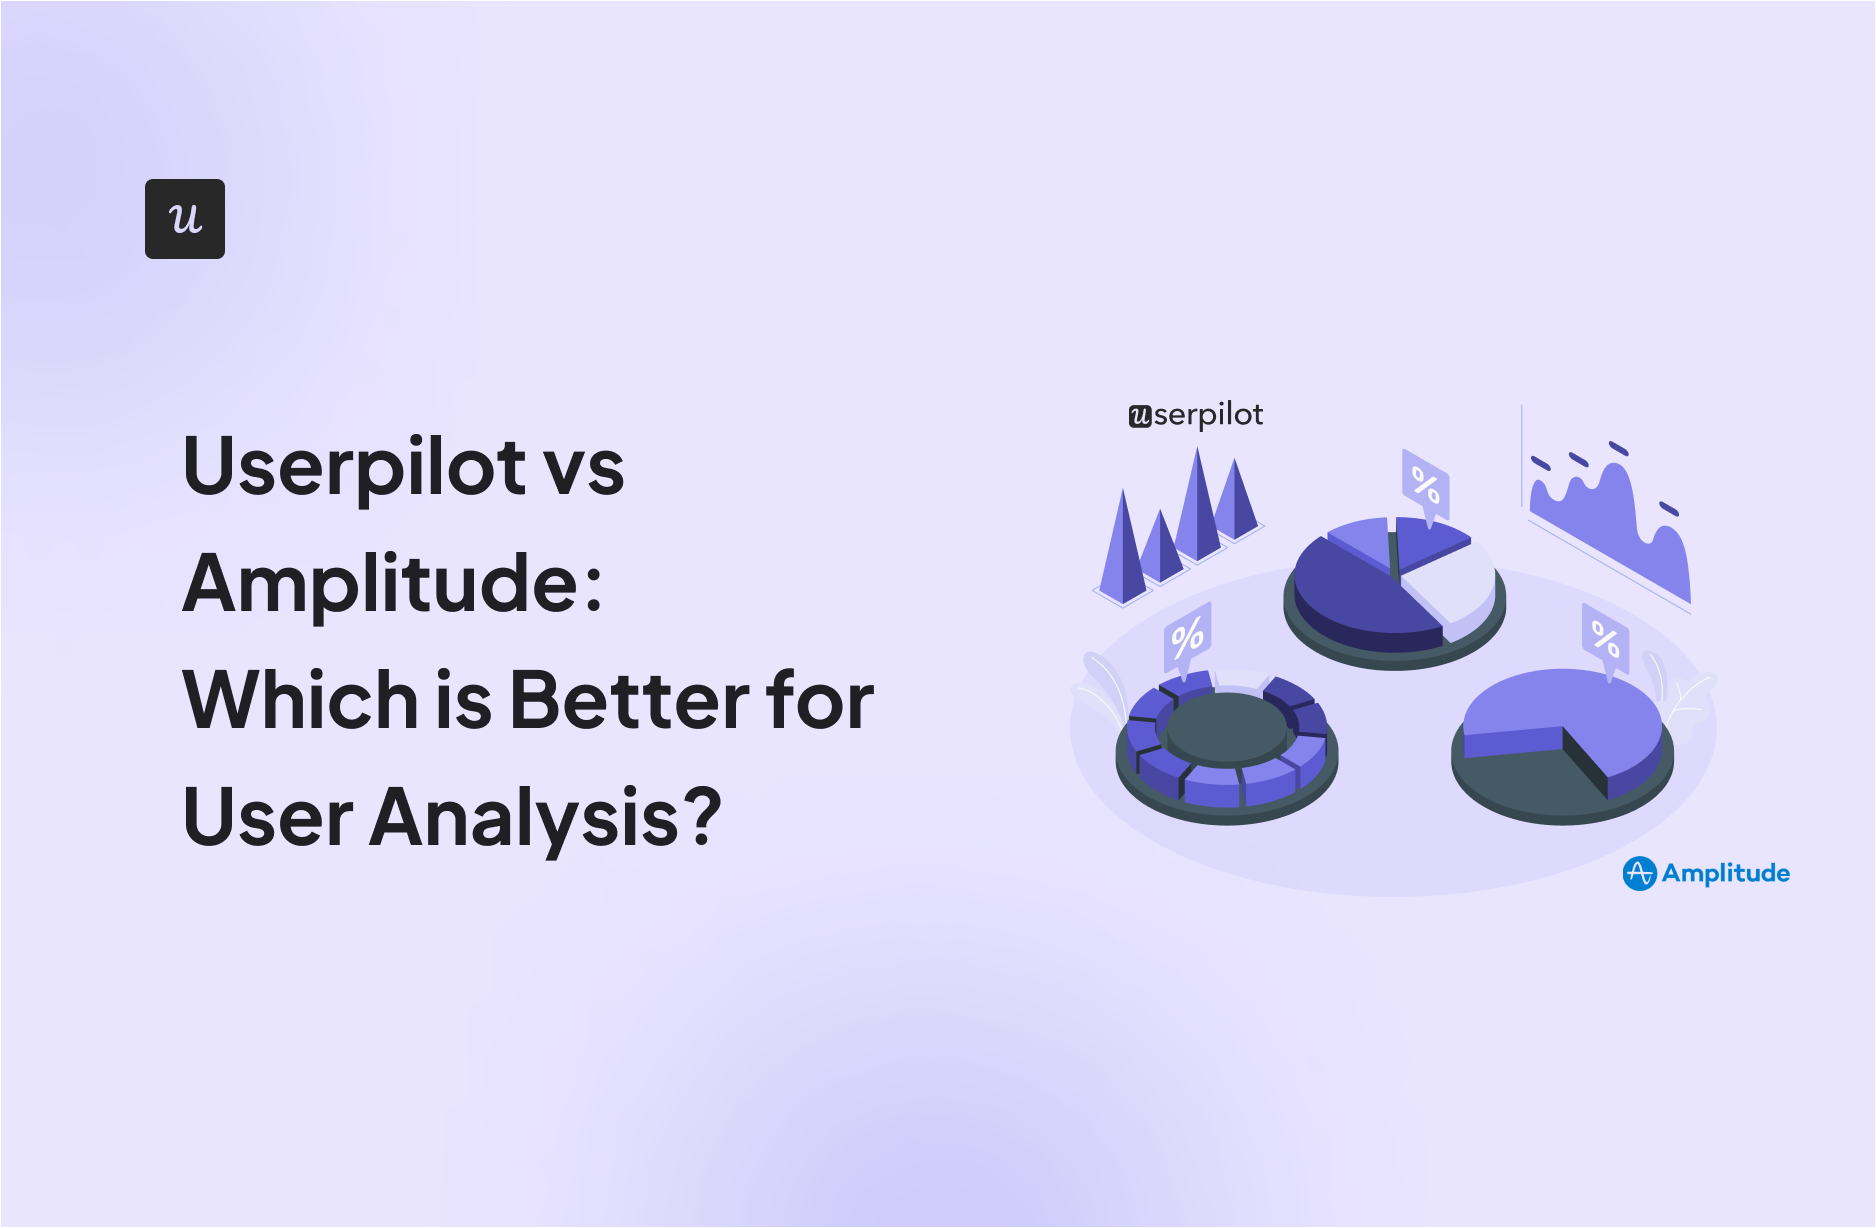 Userpilot vs Amplitude: Which is Better for User Analysis?